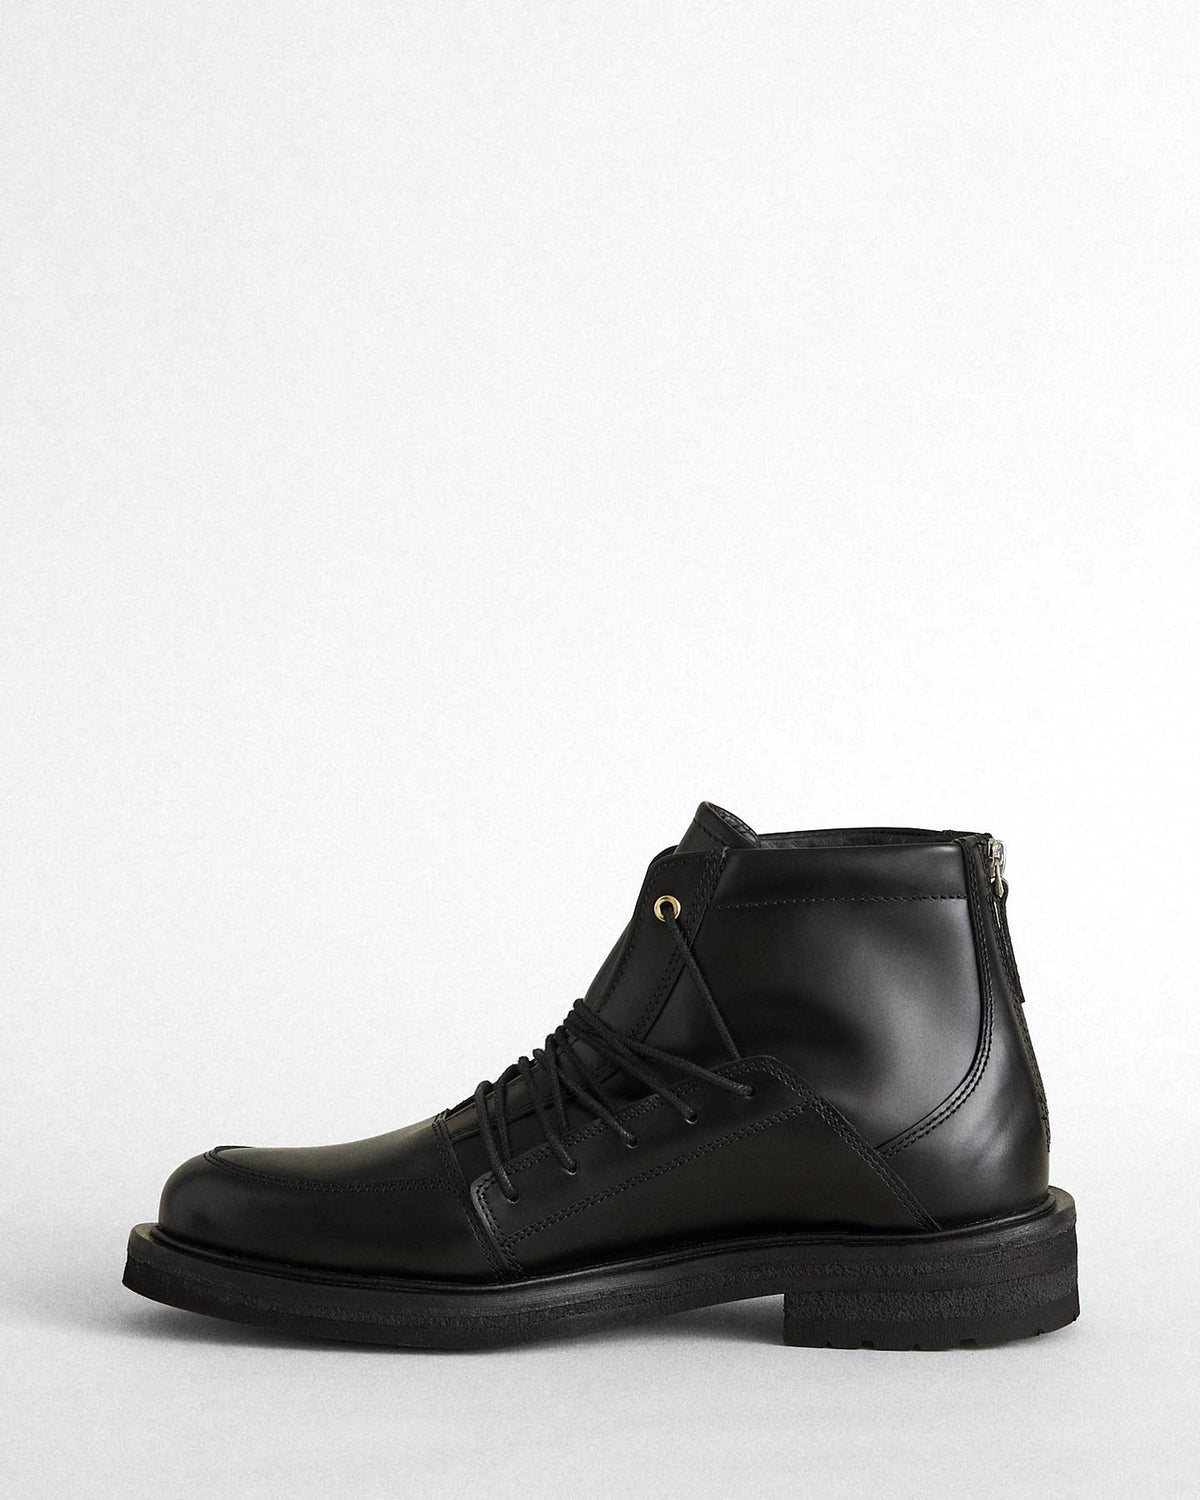 Eriksson Crepe Sole Leather Combat Boot